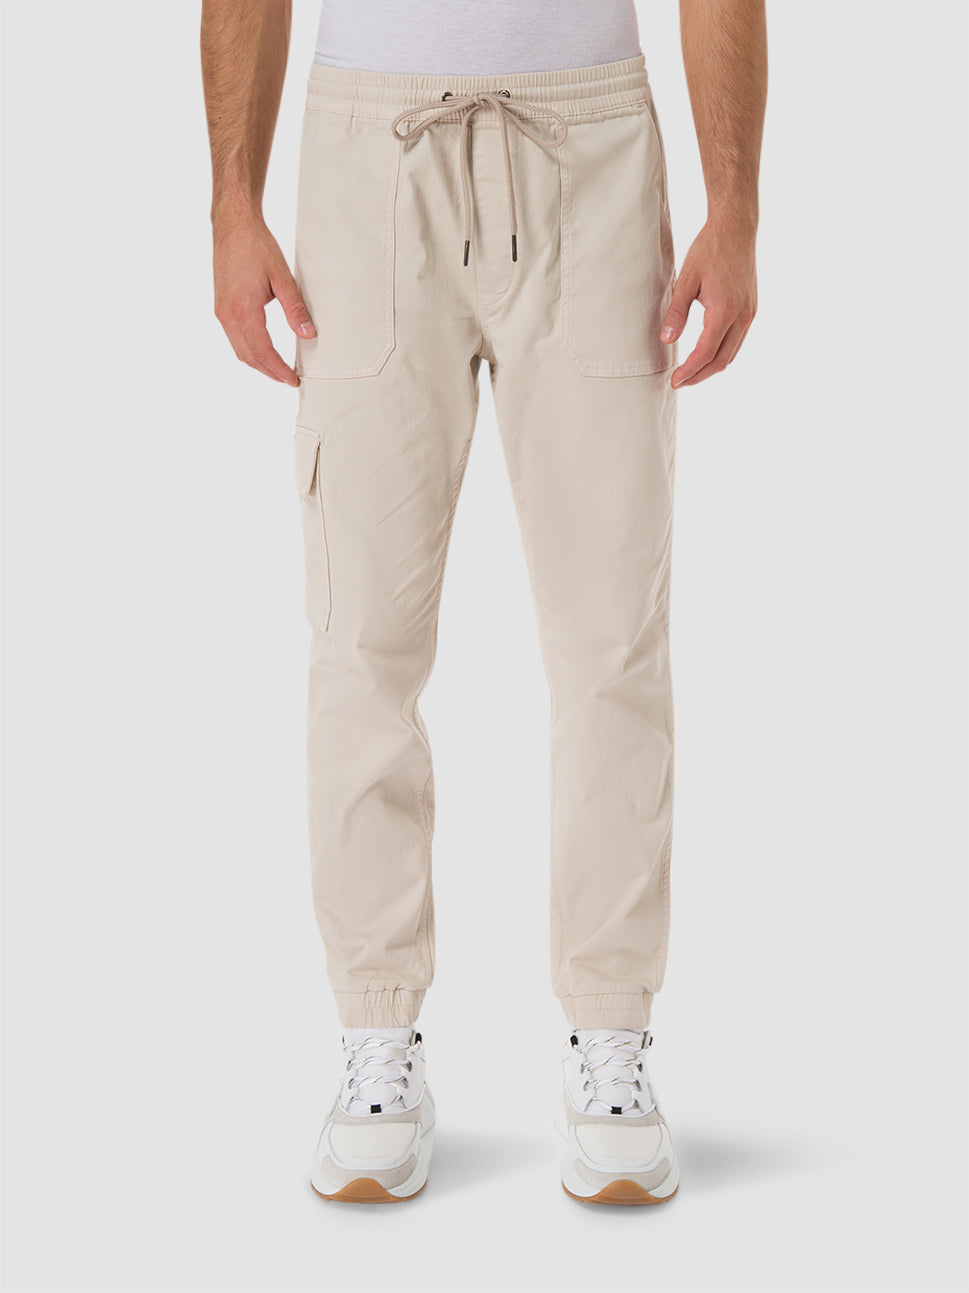 Joes Jeans Jogger Alabaster AW4DED8420